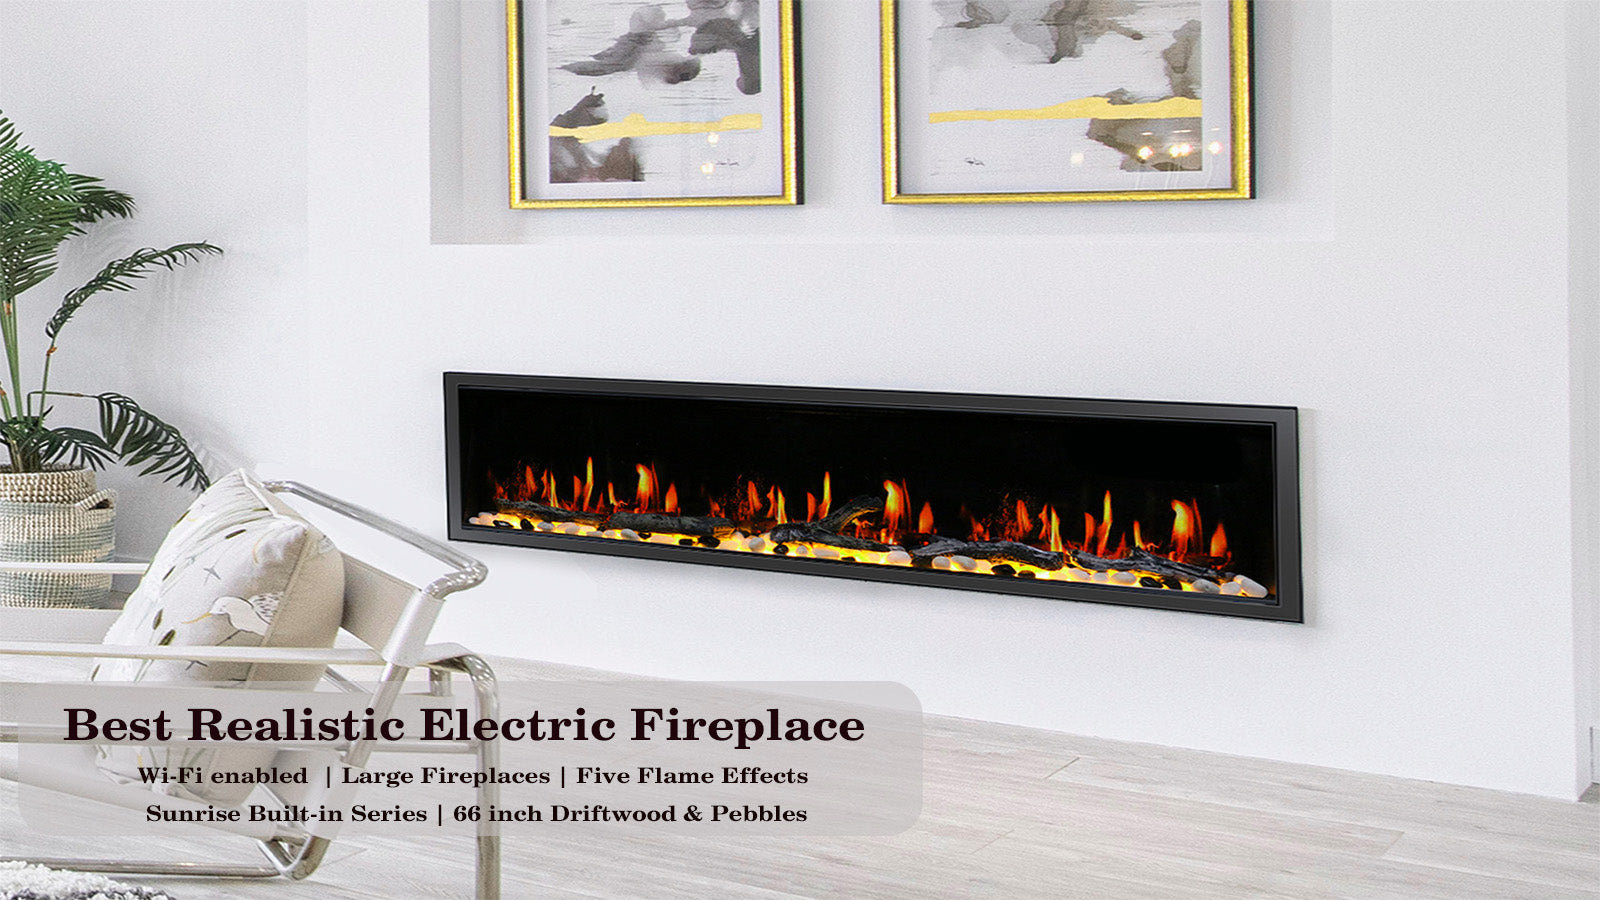 Zopflame 66 inch built-in linear electric fireplace for living room